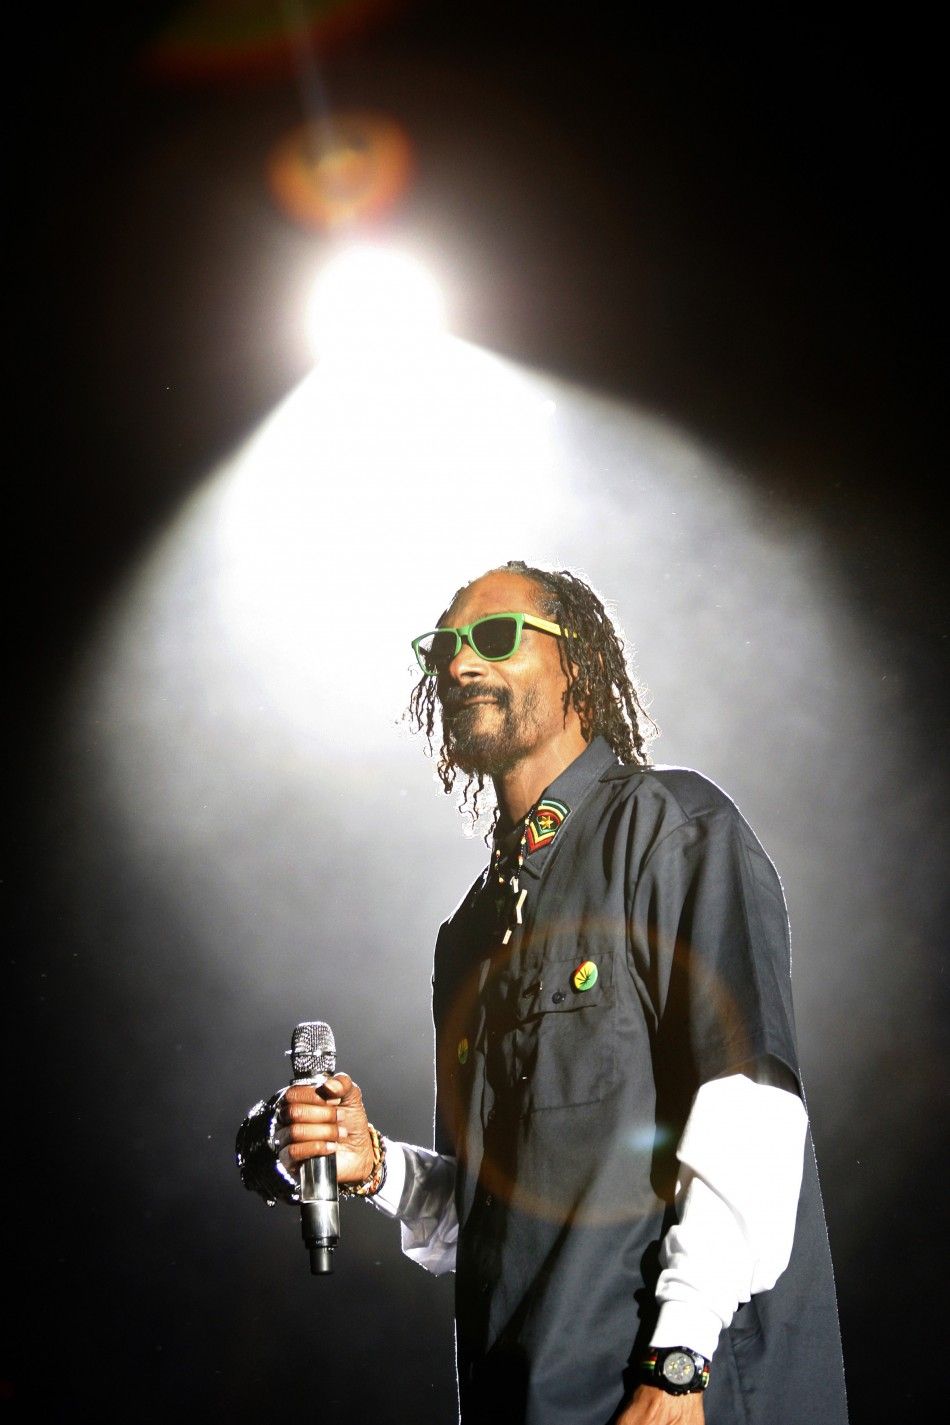 Snoop Dogg performs at the Coachella Valley Music and Arts Festival in Indio, California April 15, 2012. 